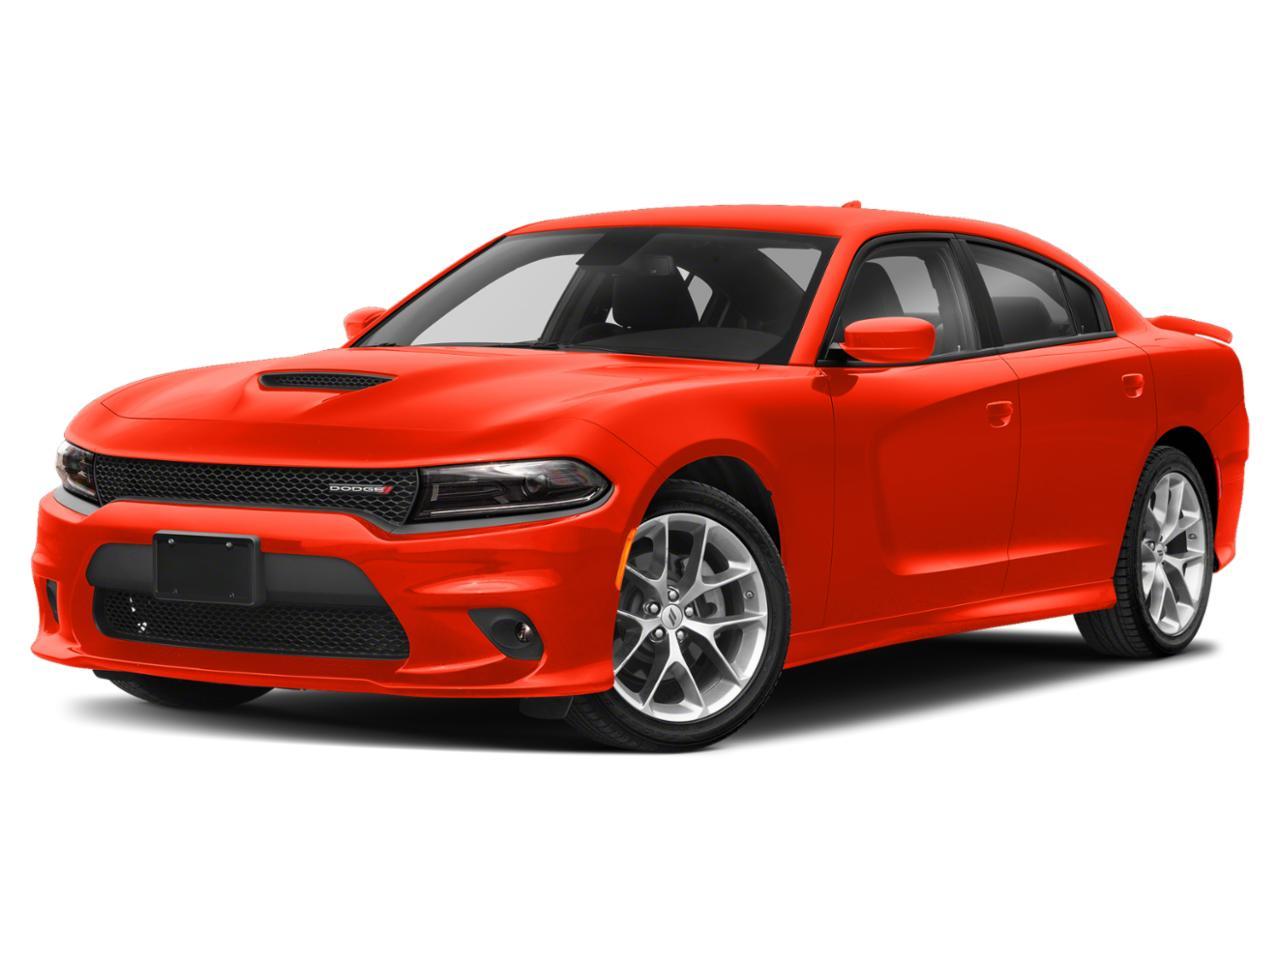 2022 Dodge Charger Vehicle Photo in Plainfield, IL 60586